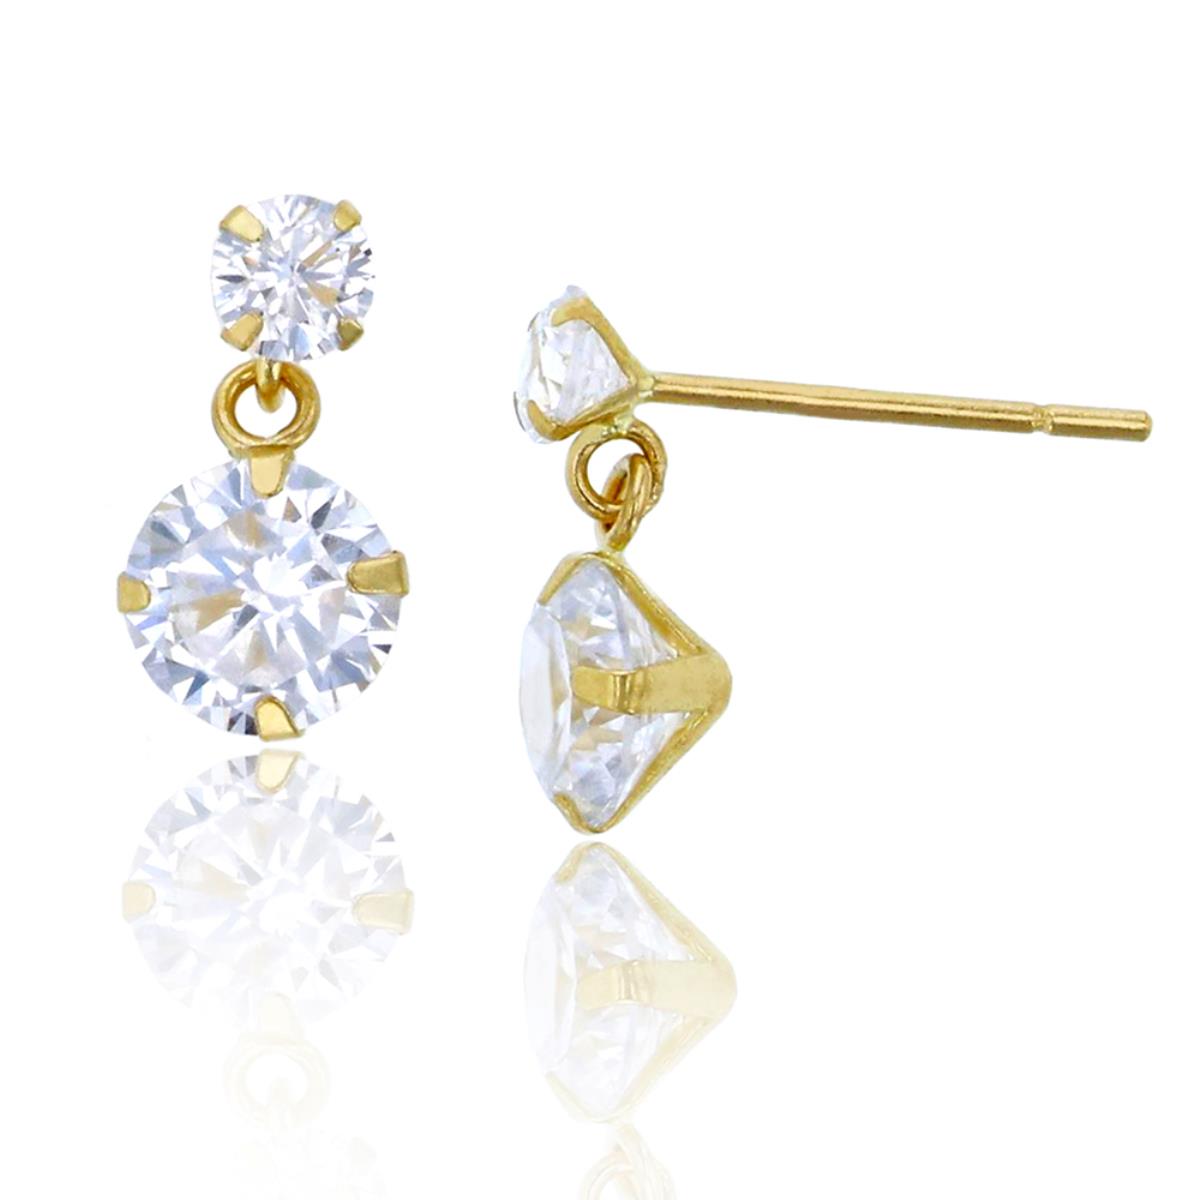 10K Yellow Gold 3mm, 5mm Chrome Diopside Dangling Martini Stud Earring